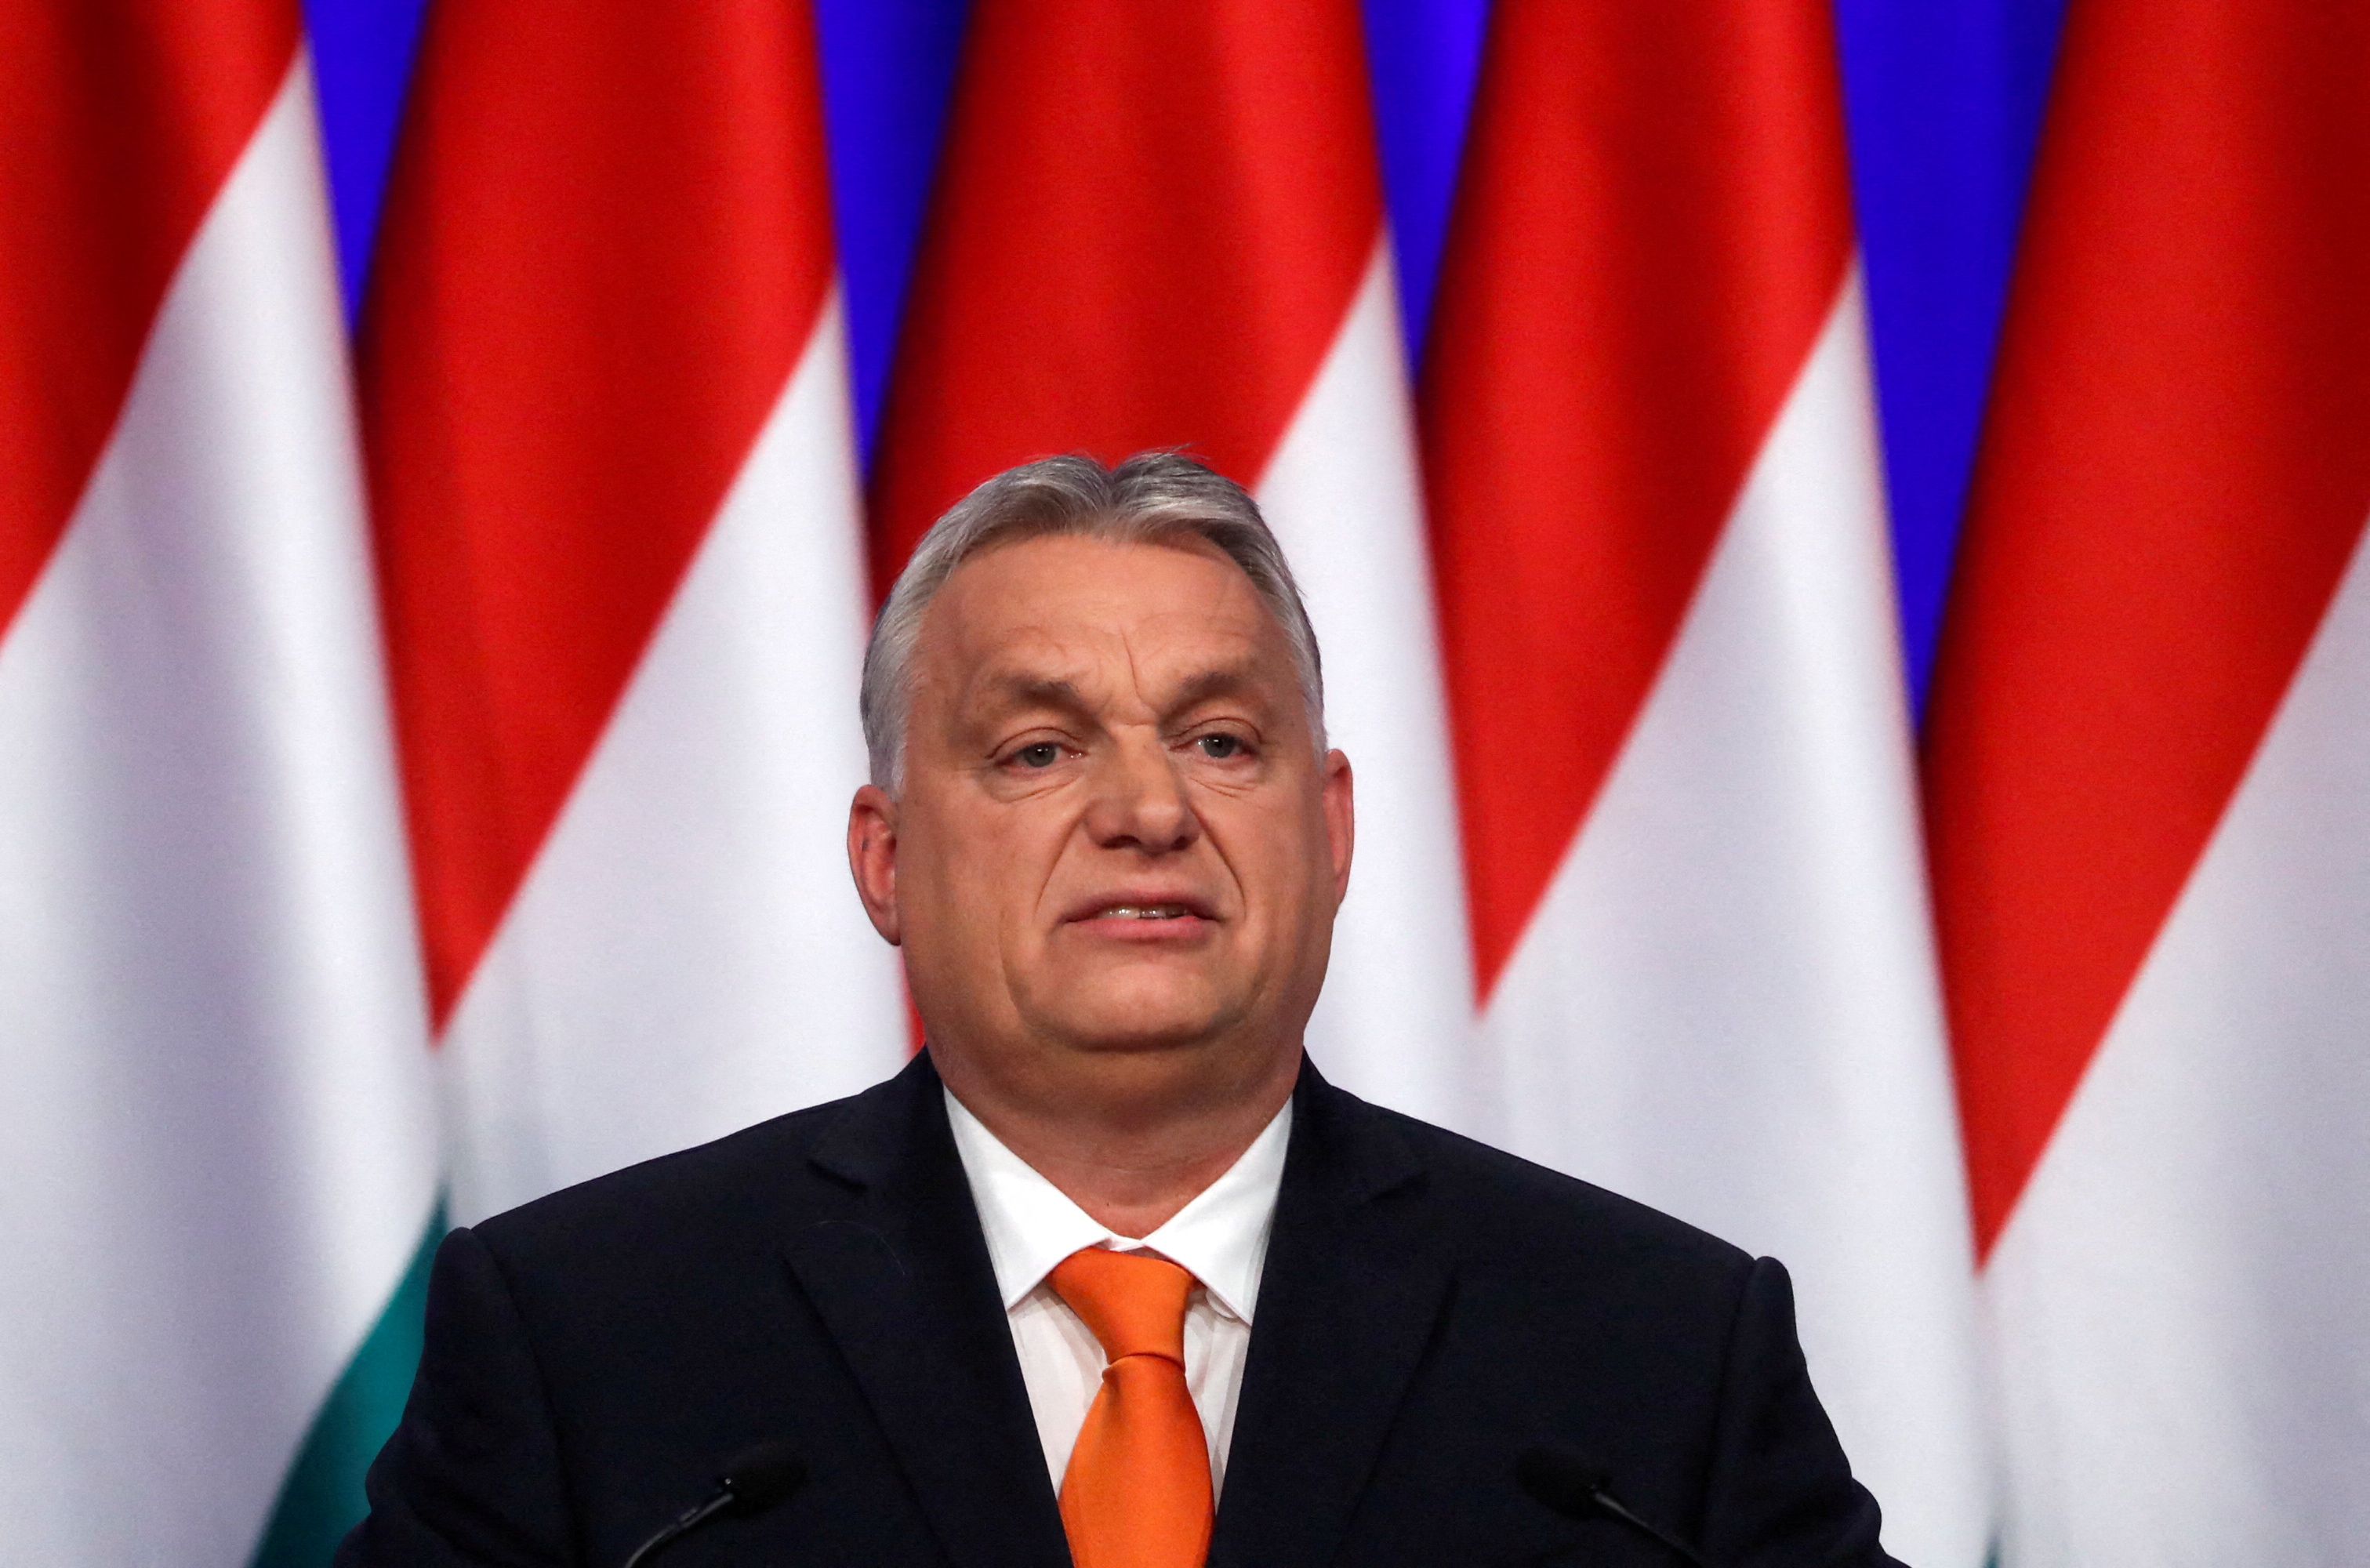 Hungarian PM Orban delivers his annual speech in Budapest